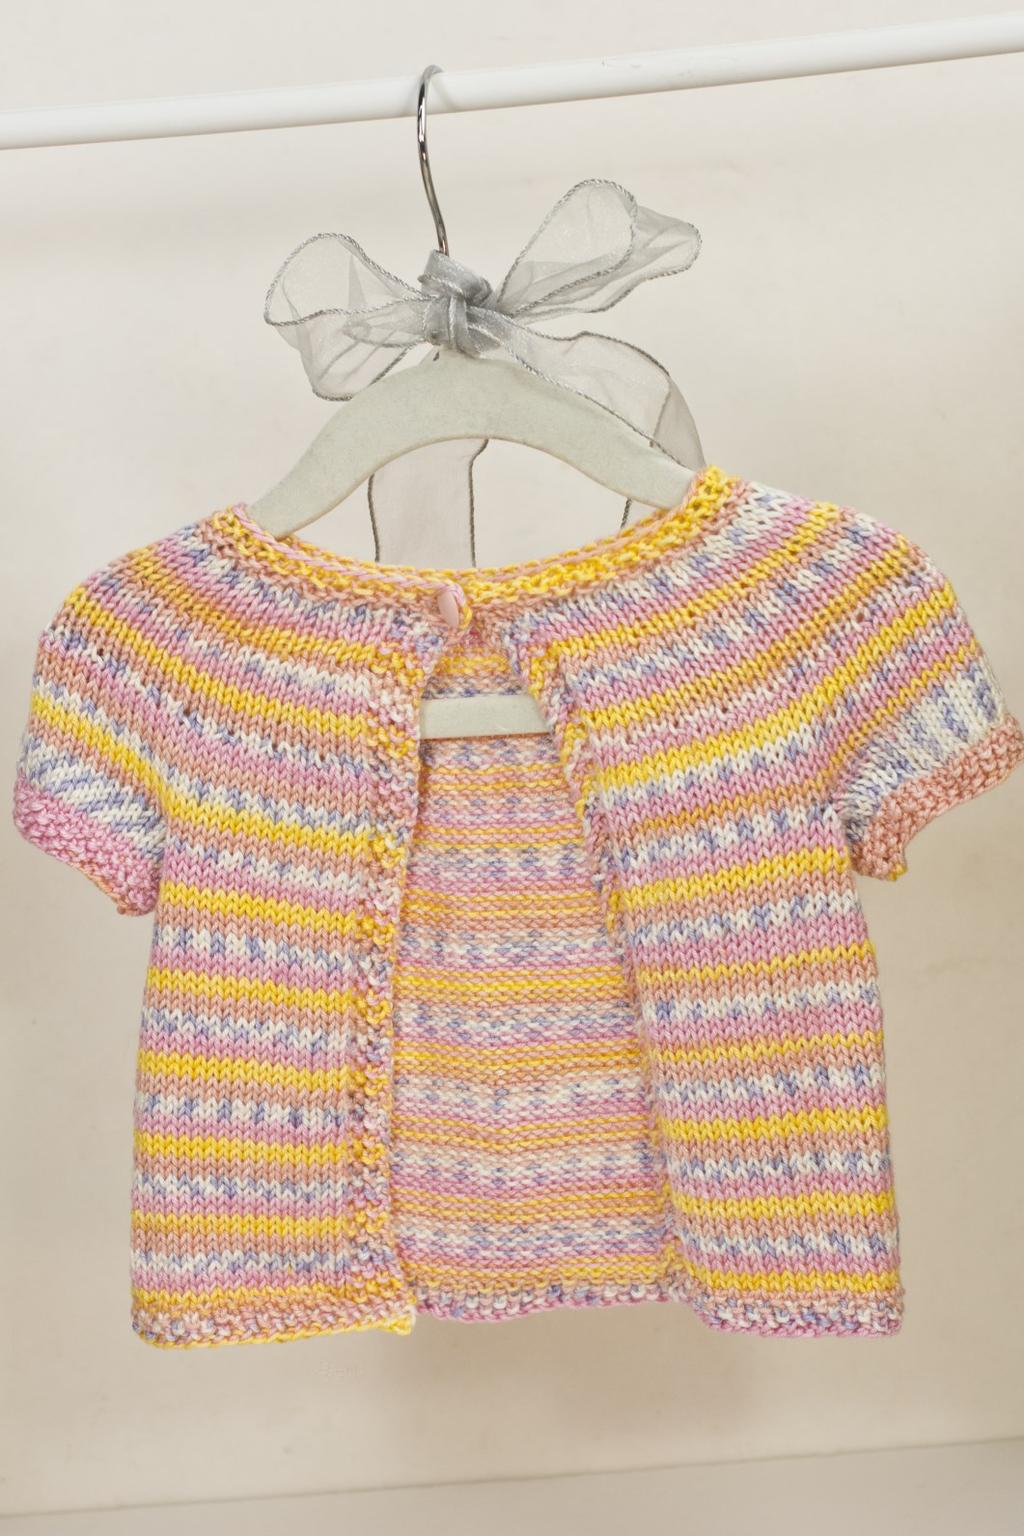 North Shore Prints Simple Cardi Set Designed by Kay Meadors Skill Level: Intermediate Sizes: Note: One pair of Newborn socks was used in the images of the shoes.